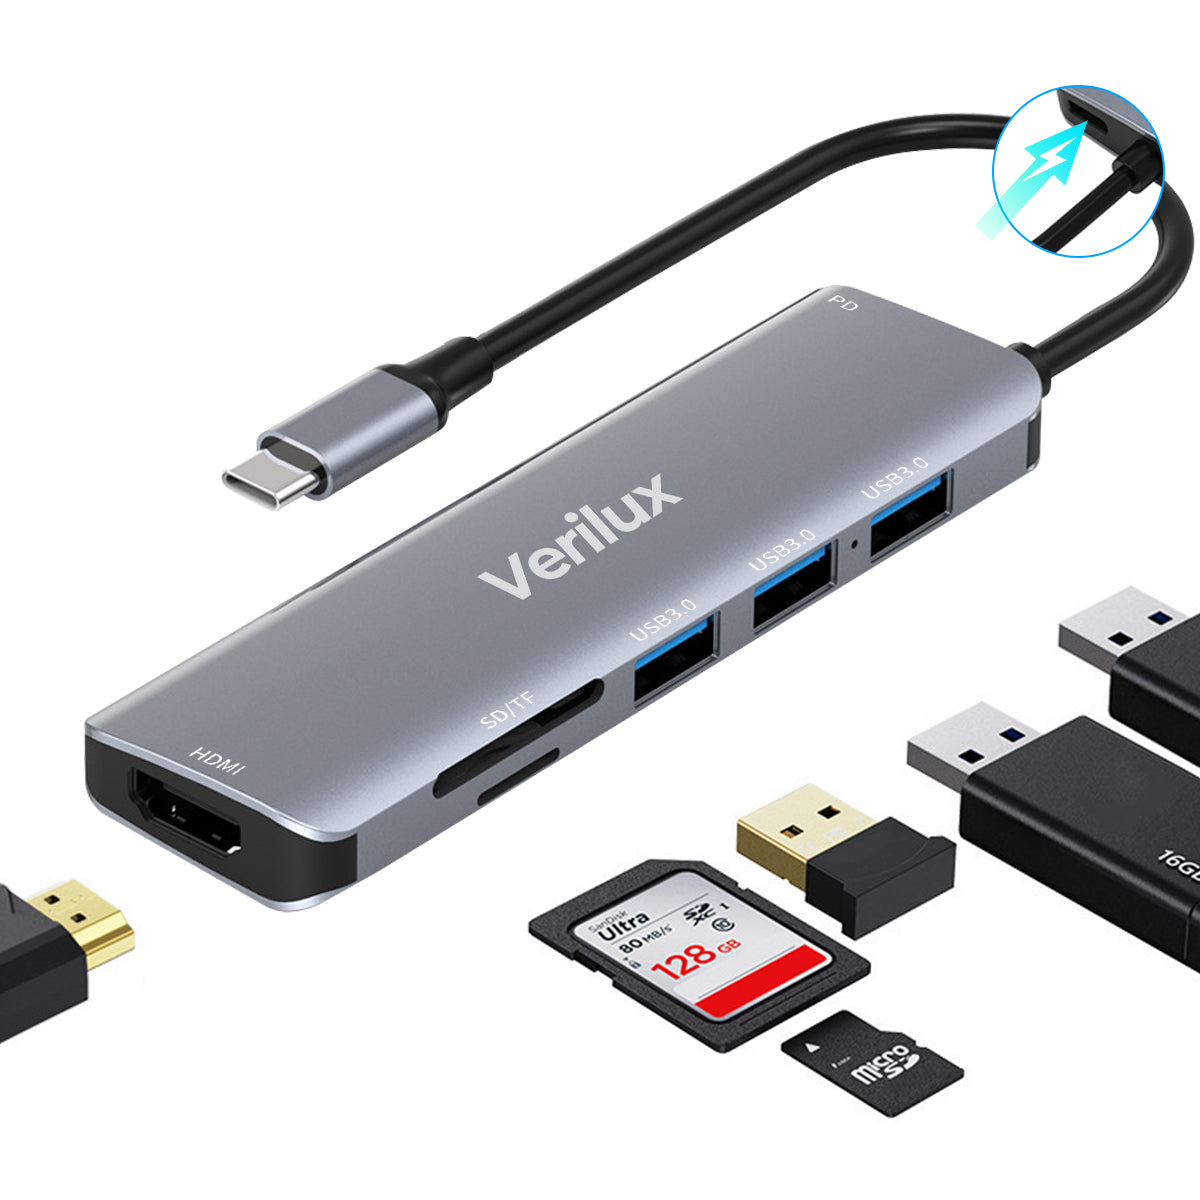 Verilux USB C Hub Multiport Adapter 7 in 1 Portable Aluminum Type C Hub with 4K@30Hz HDMI Output, 55W PD, 3 X USB 3.0 Ports, SD/Micro SD Card Reader Compatible for MacBook Pro/Air M1, Type C Devices